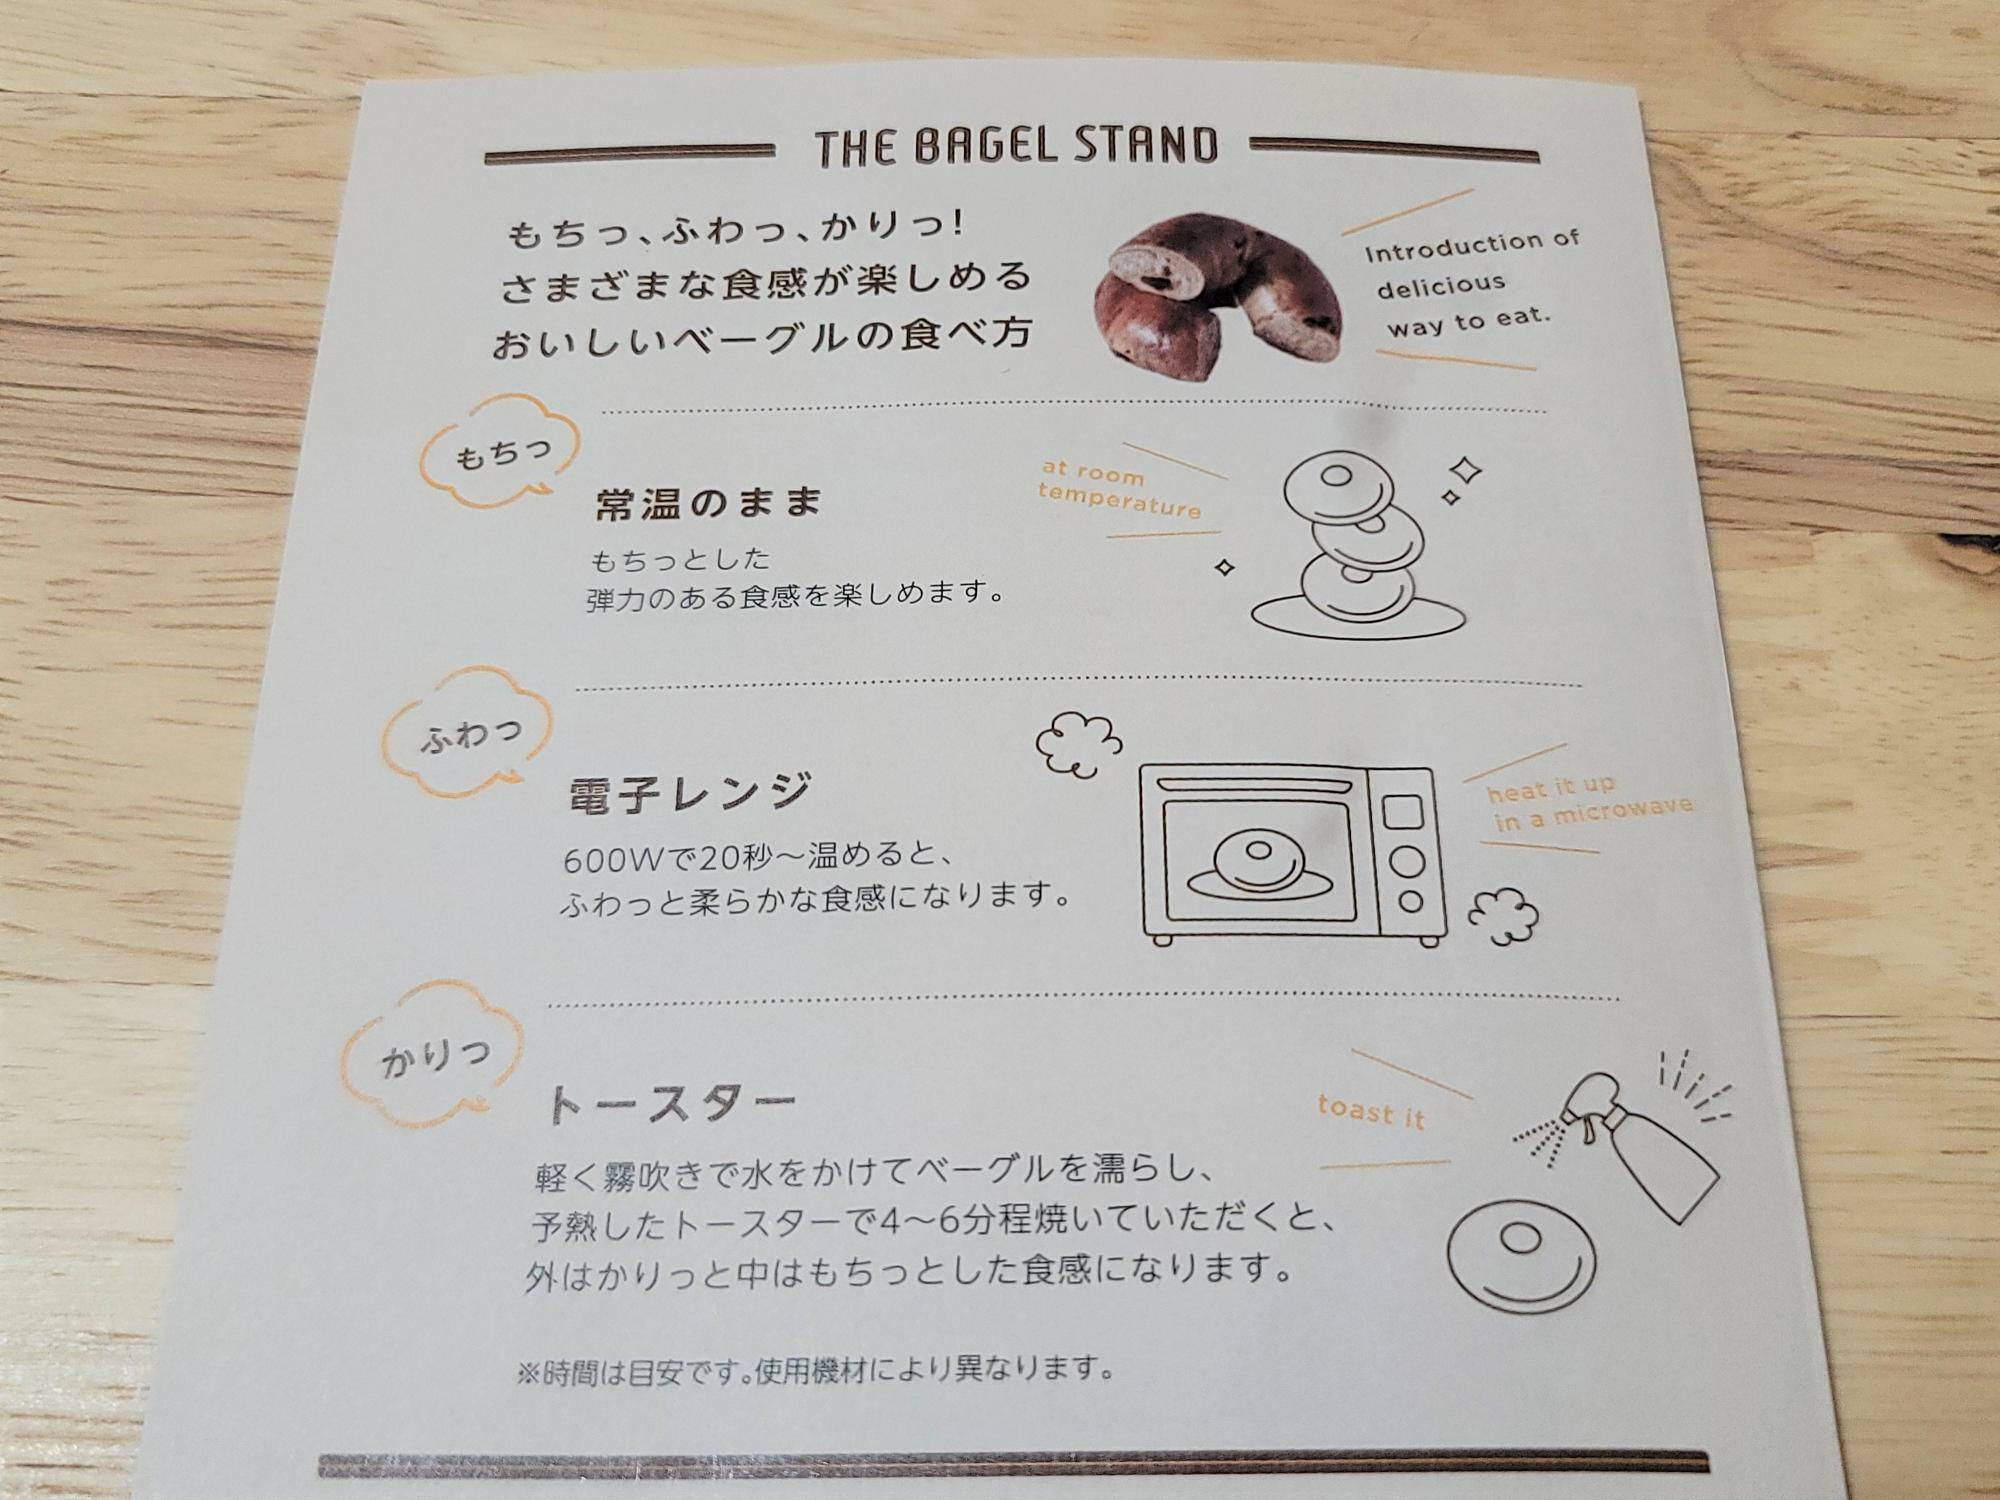 「THE BAGEL STAND」のパンフレット。